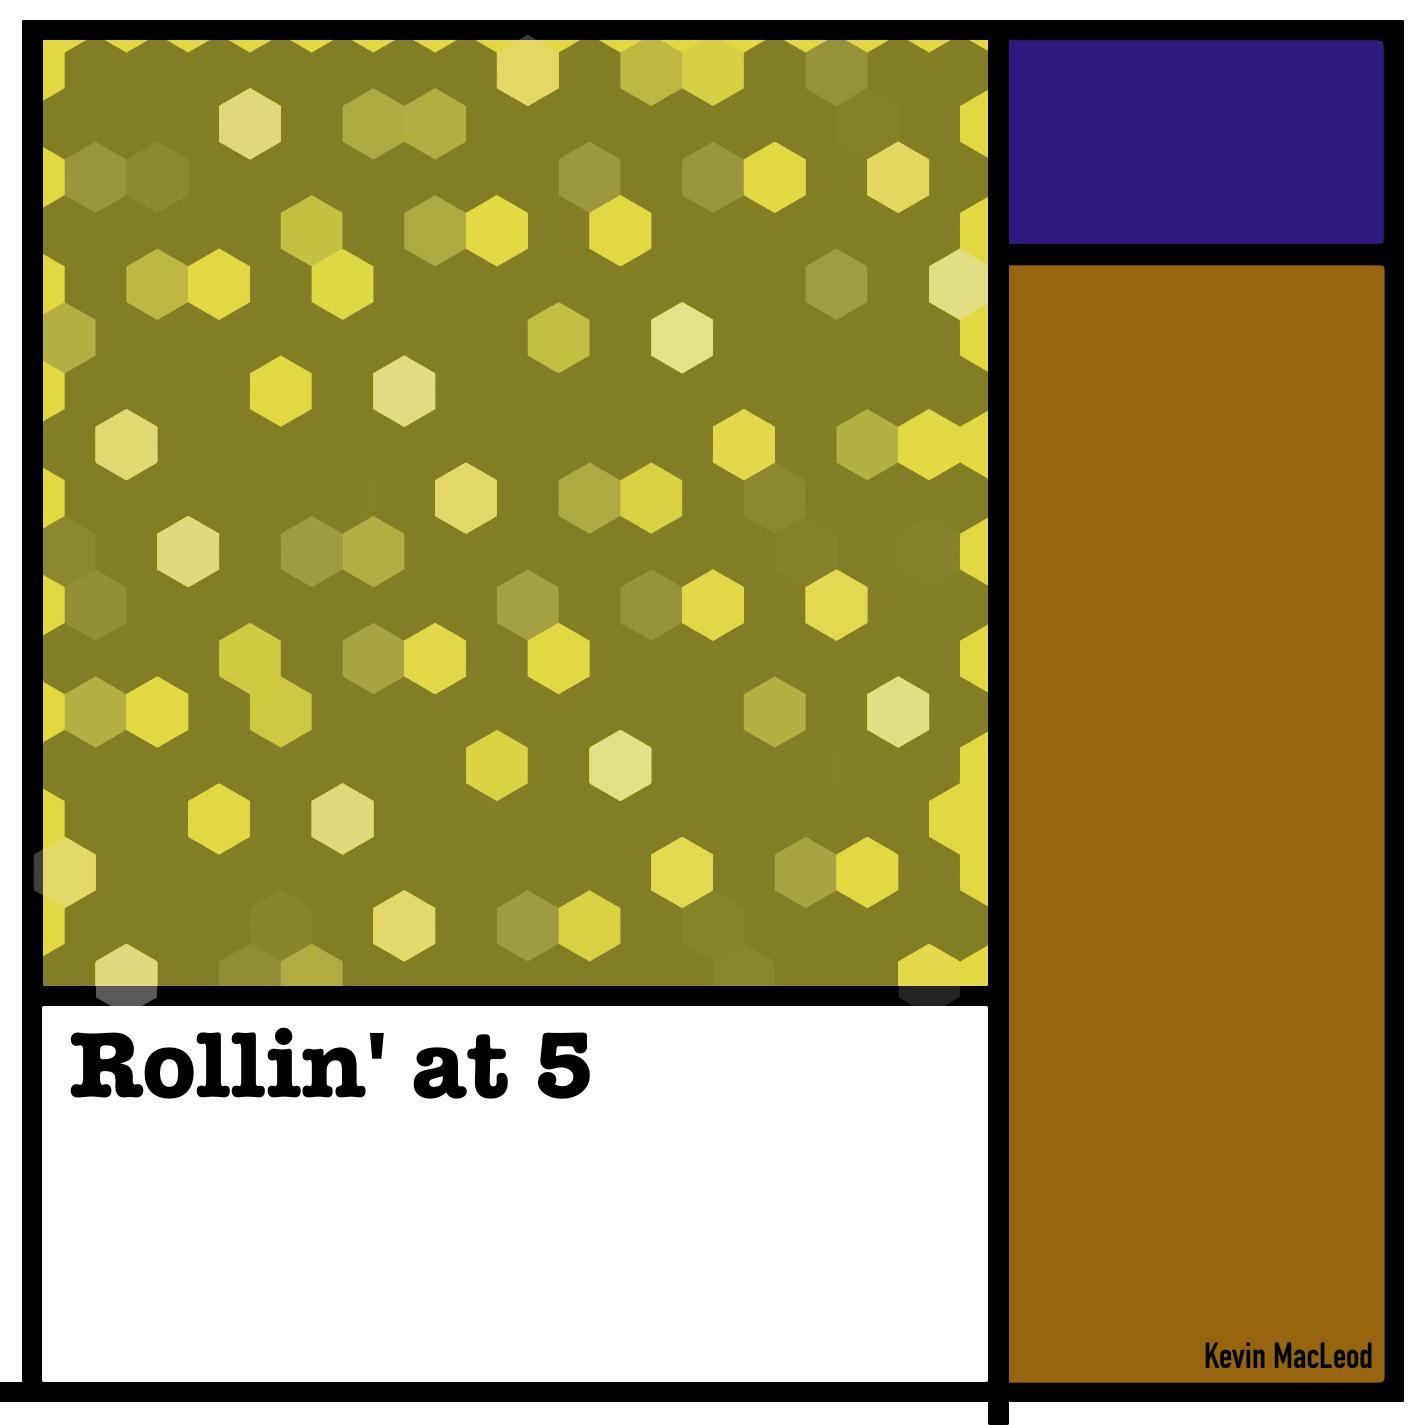 Rollin' at 5